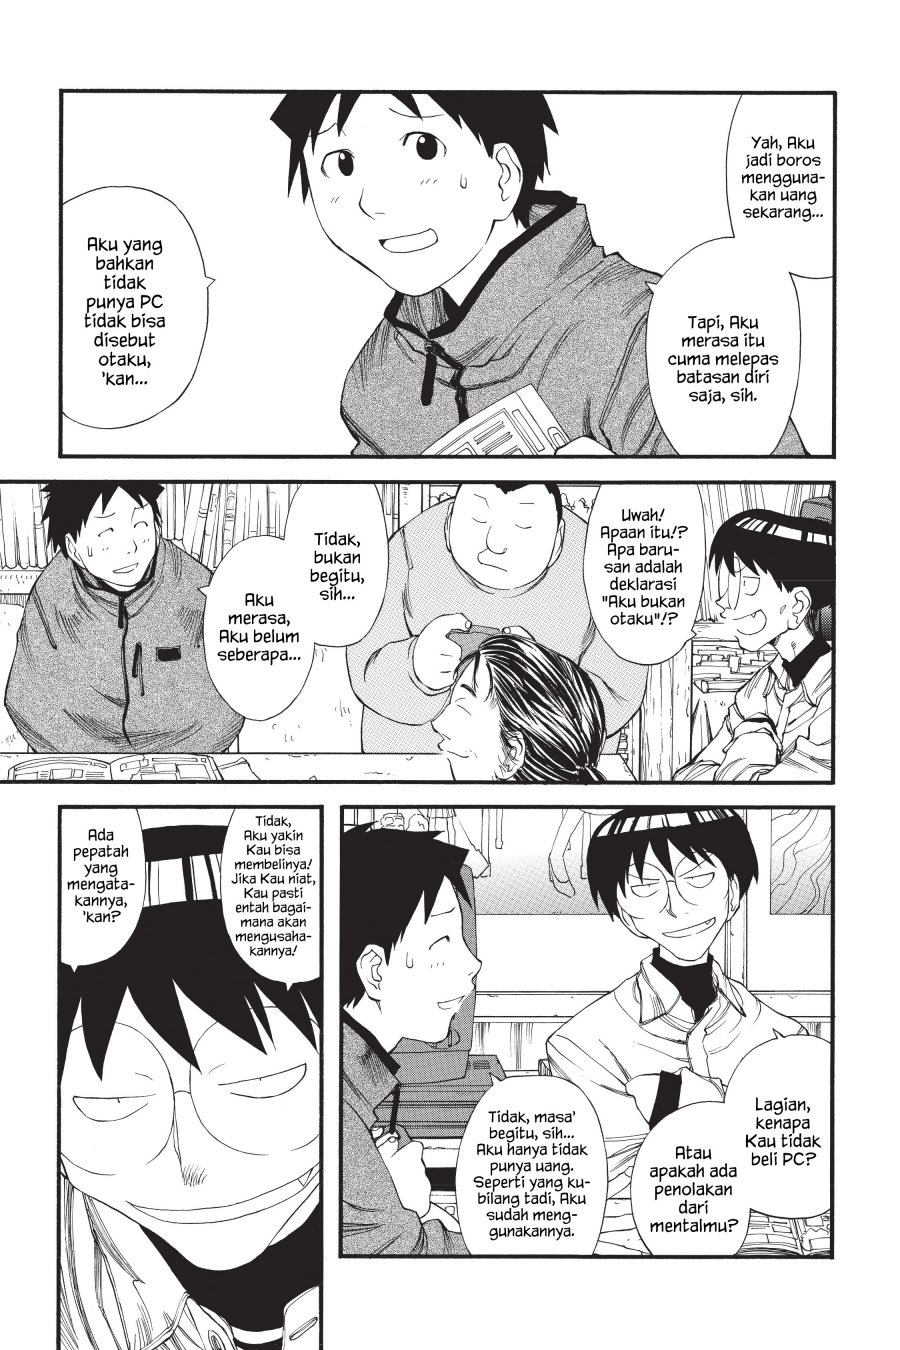 Genshiken – The Society for the Study of Modern Visual Culture Chapter 11 Image 2